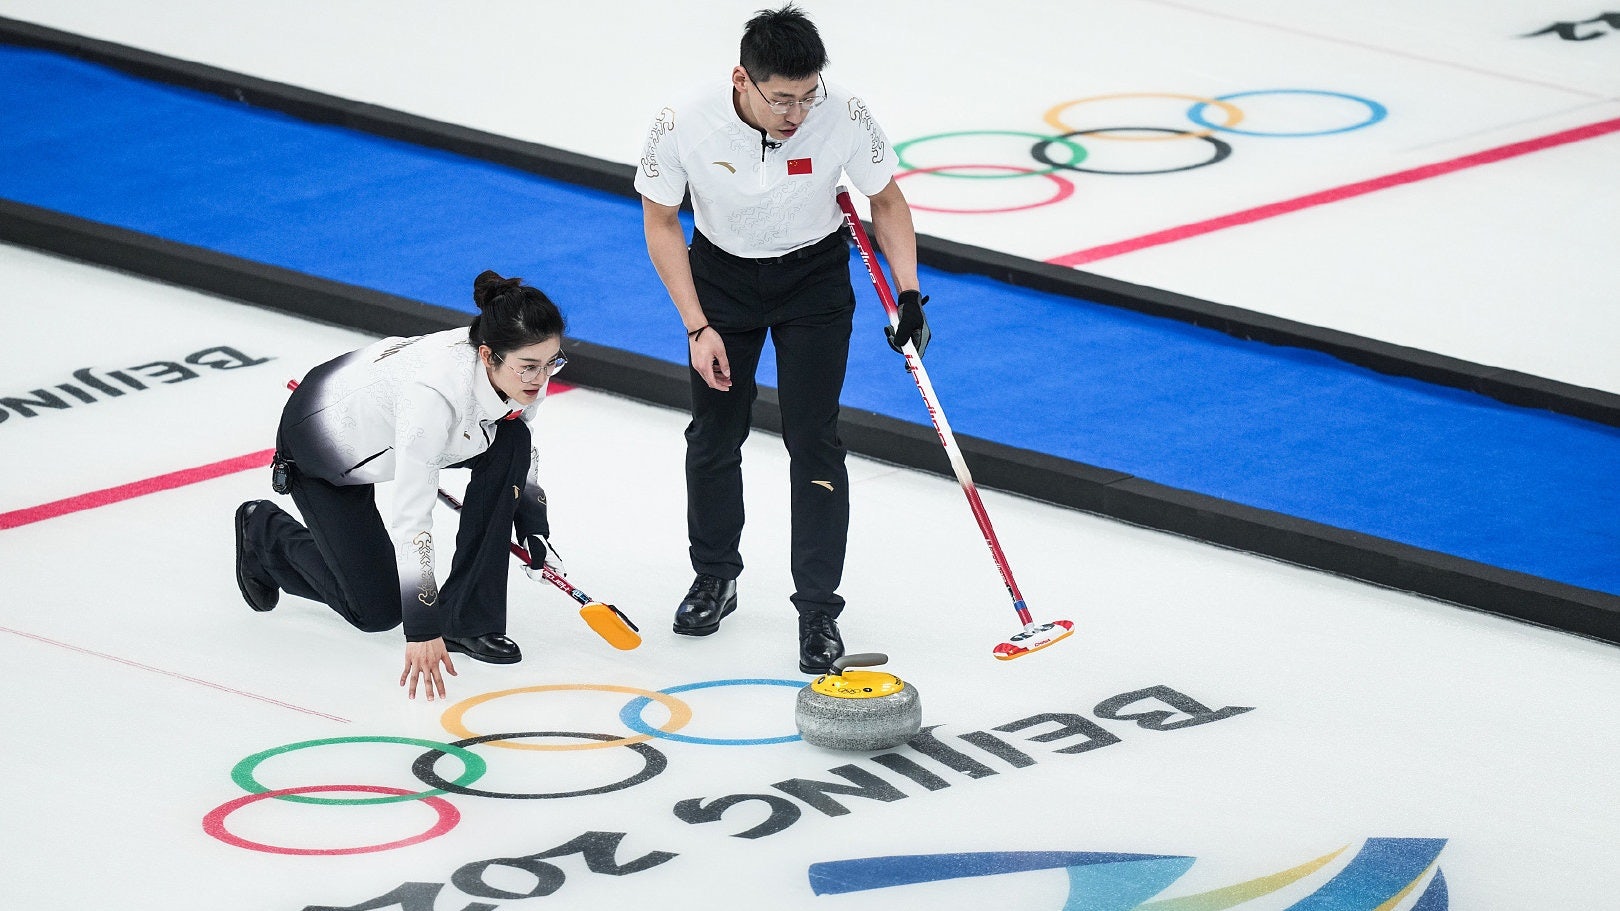 The Beijing Winter Olympics is kicking off on February 4. Given its influence, will the Games’ official sportswear partner Anta grow its reach in China? Photo: Shutterstock